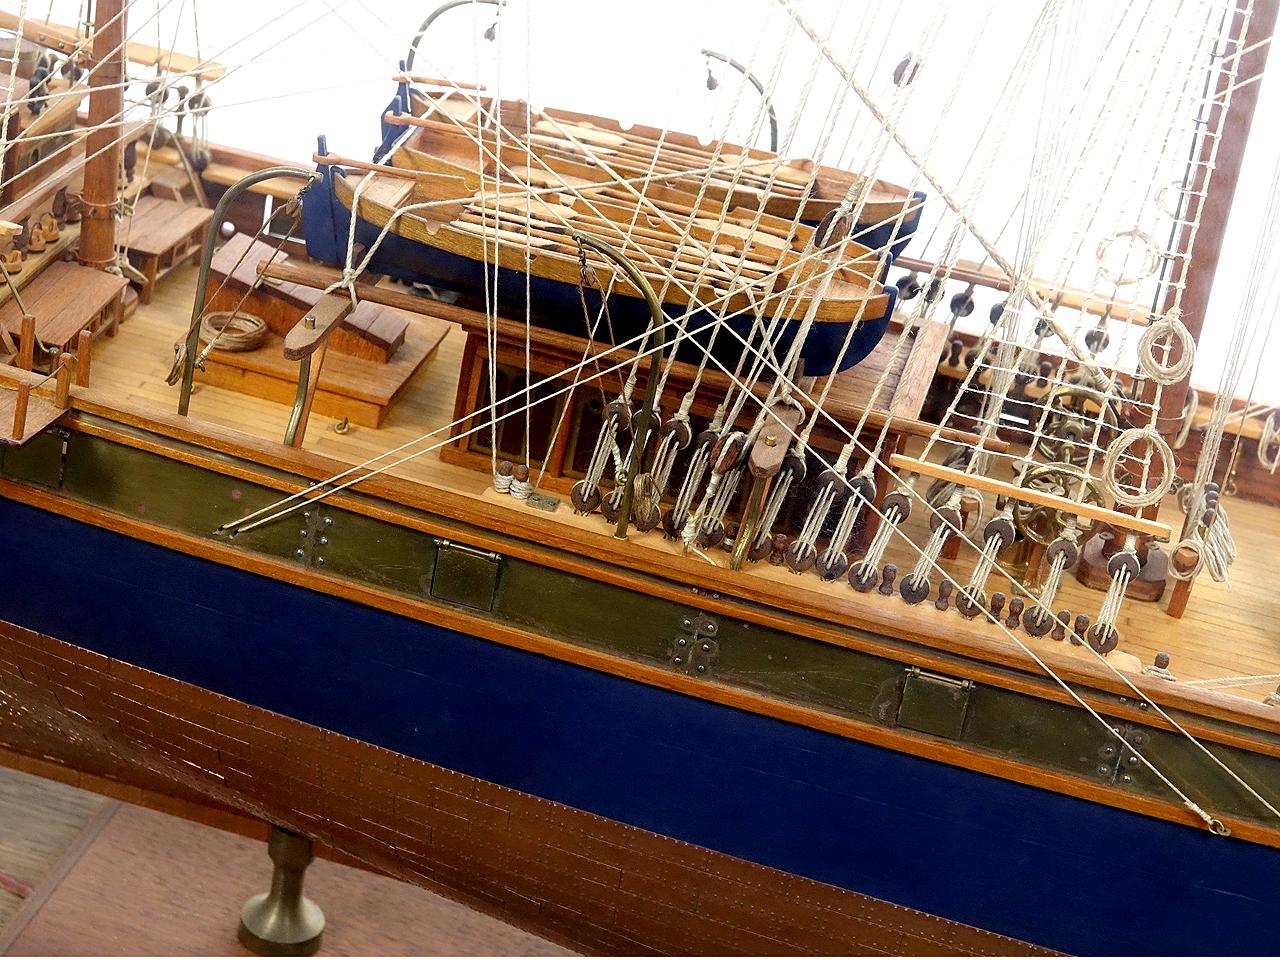 The clipper ship Cutty Sark was an icon of design in 1869 and still remains a model builders favorite. I remember as a child my father building the same ship and having it proudly on display for decades. The example pictured is one of the best I've